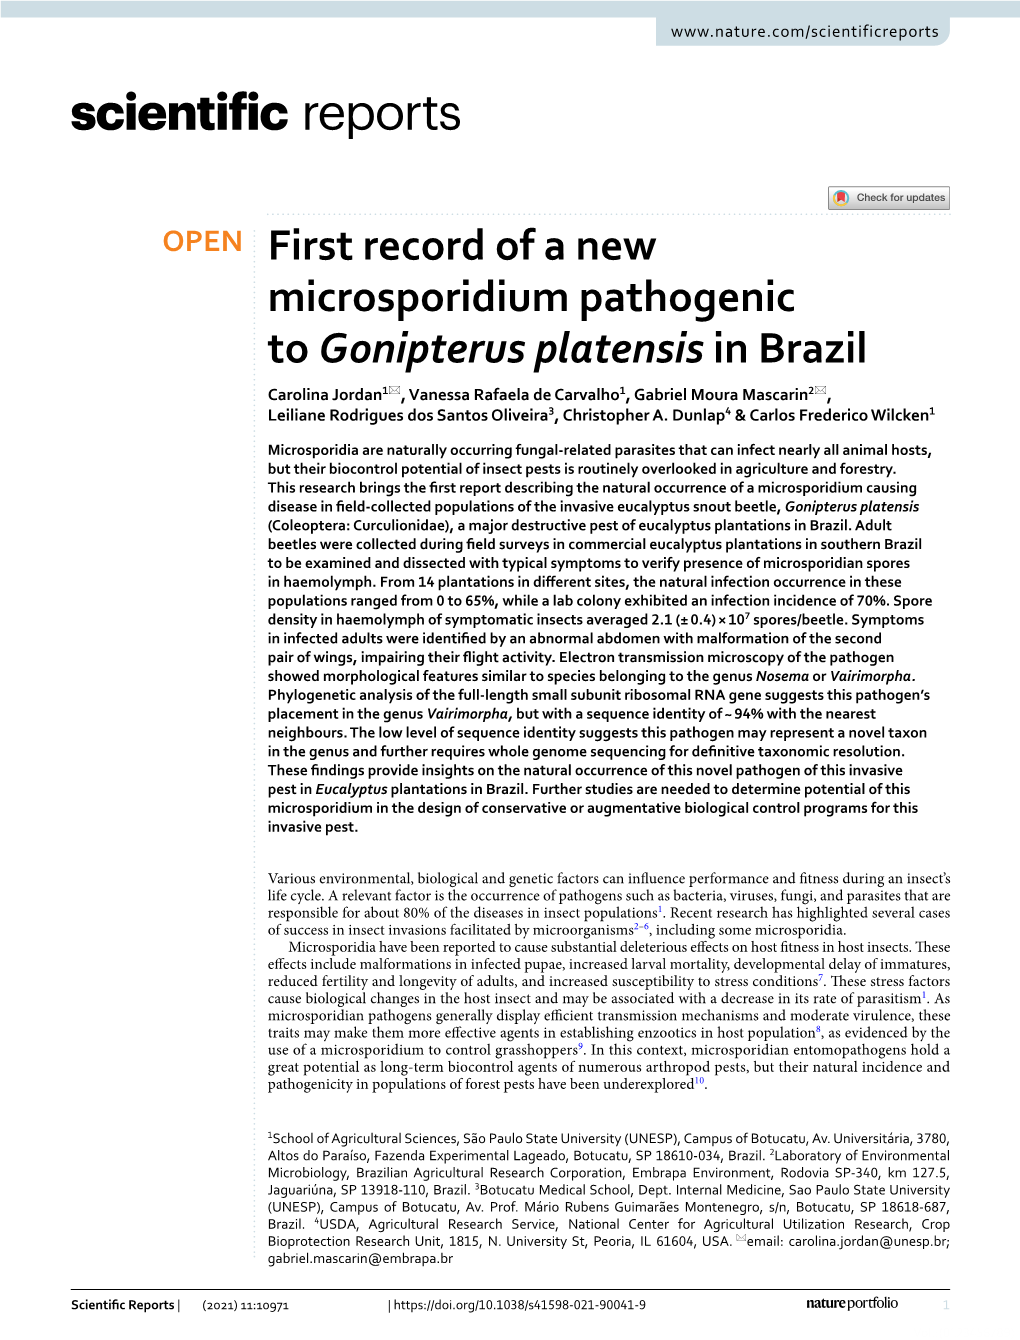 First Record of a New Microsporidium Pathogenic to Gonipterus Platensis